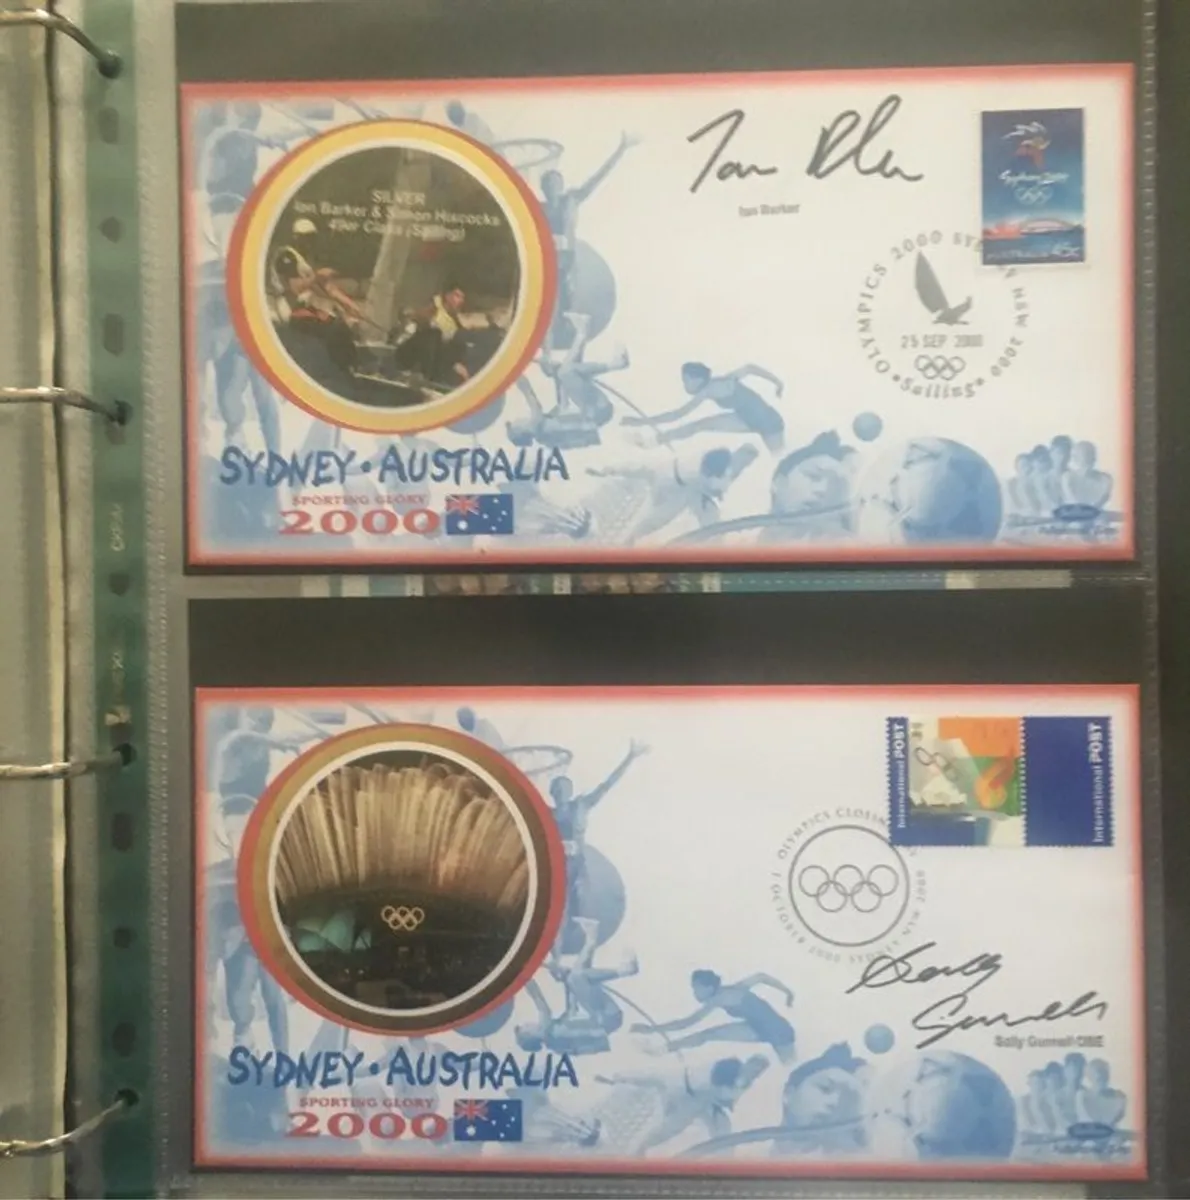 Australia Sydney 2000 Olympic Games Medal Winners Stamp Collection by Benham. Includes 16 sheets & 23 Covers. (31 images)